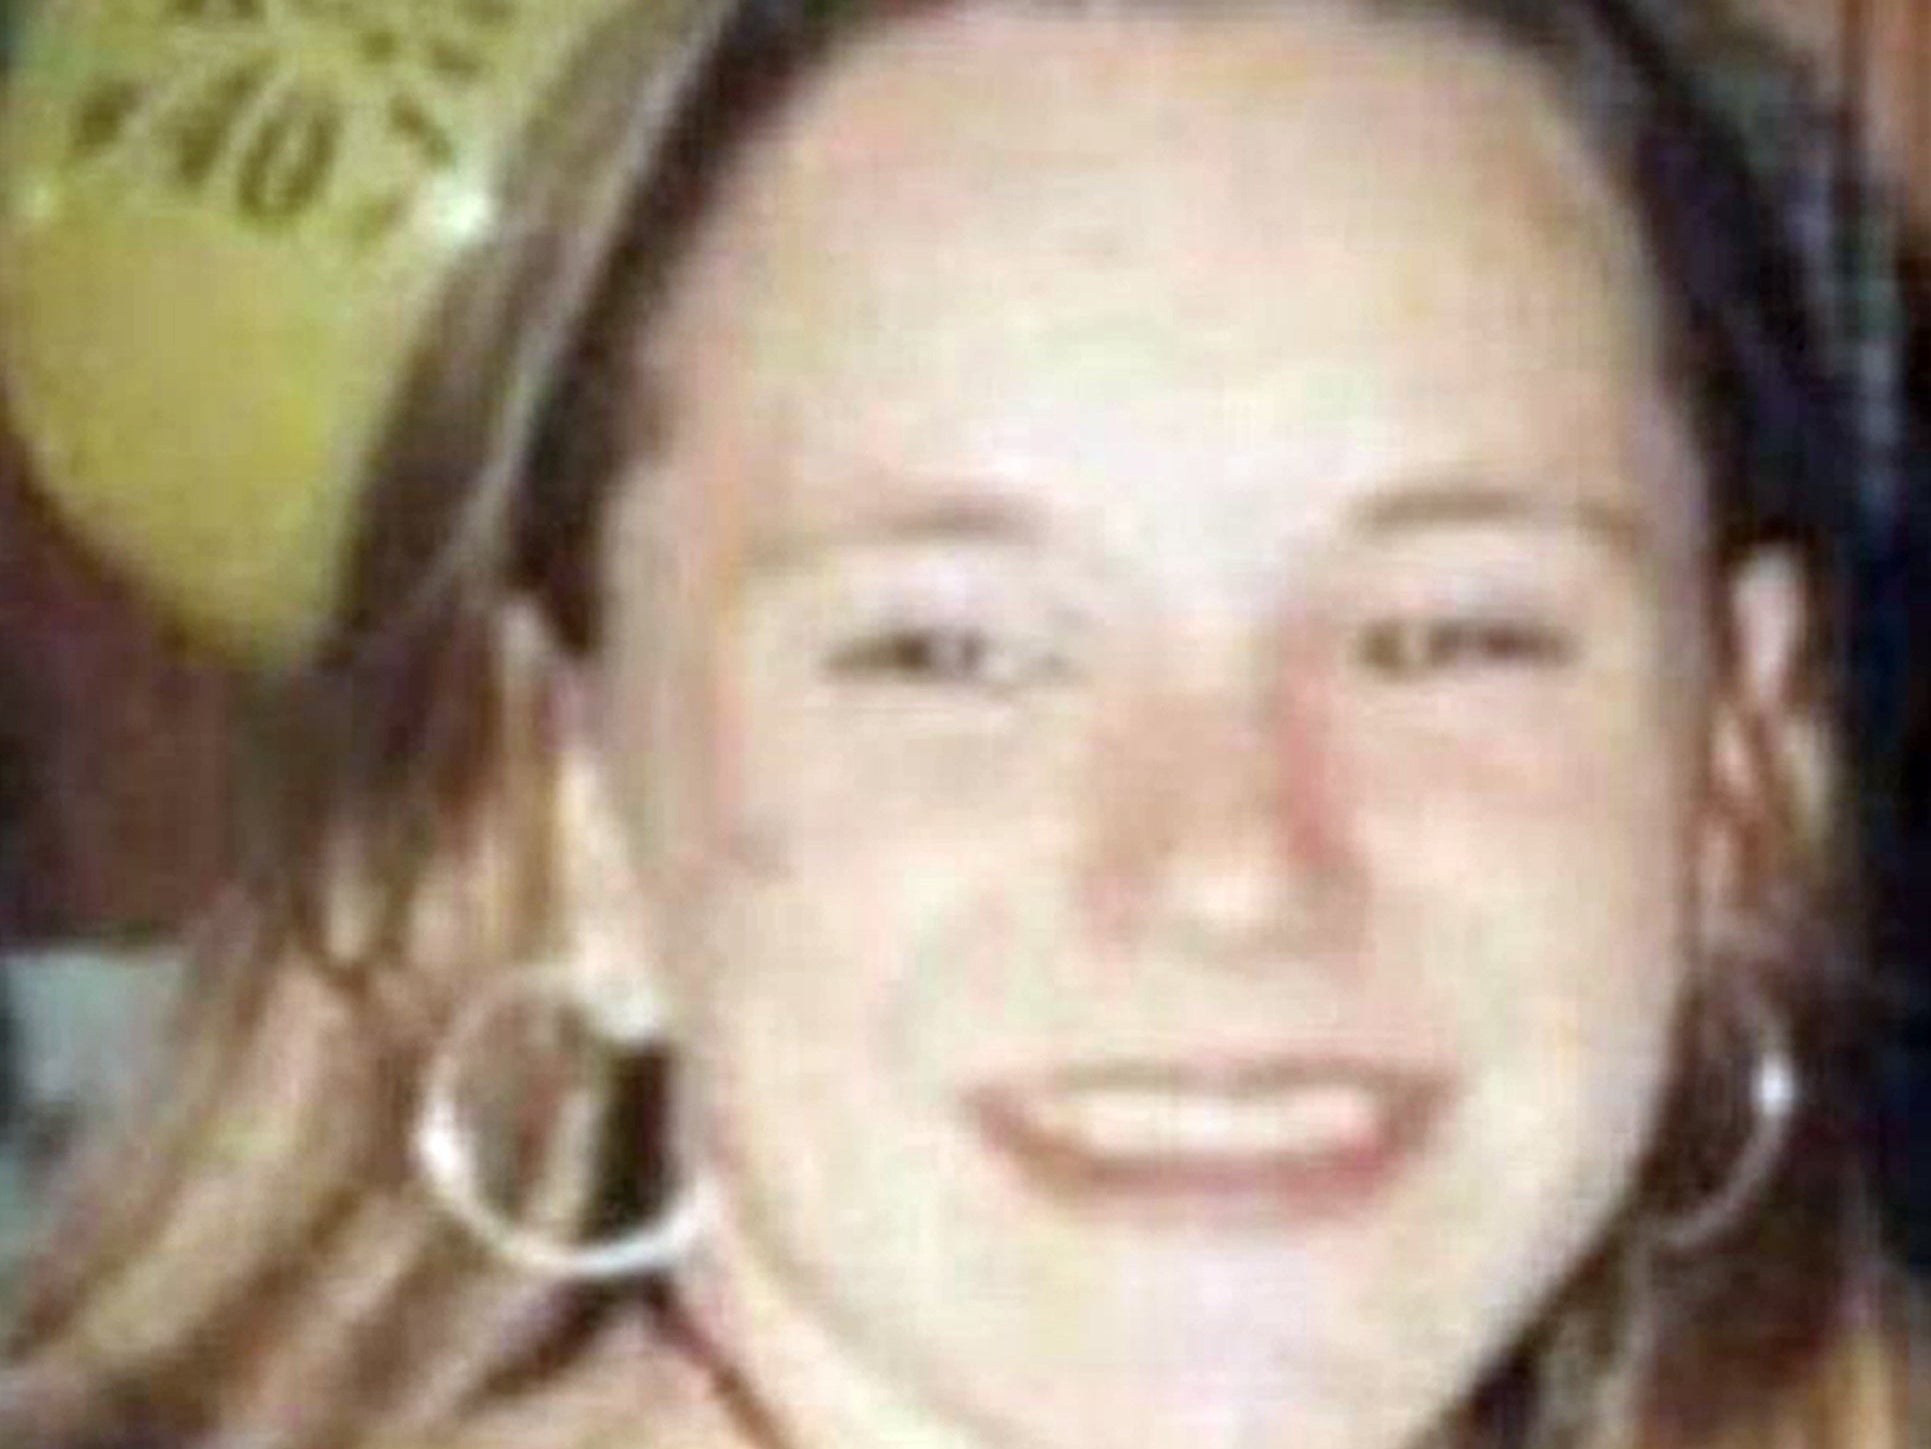 Claire Holland went missing while on a night out in 2012